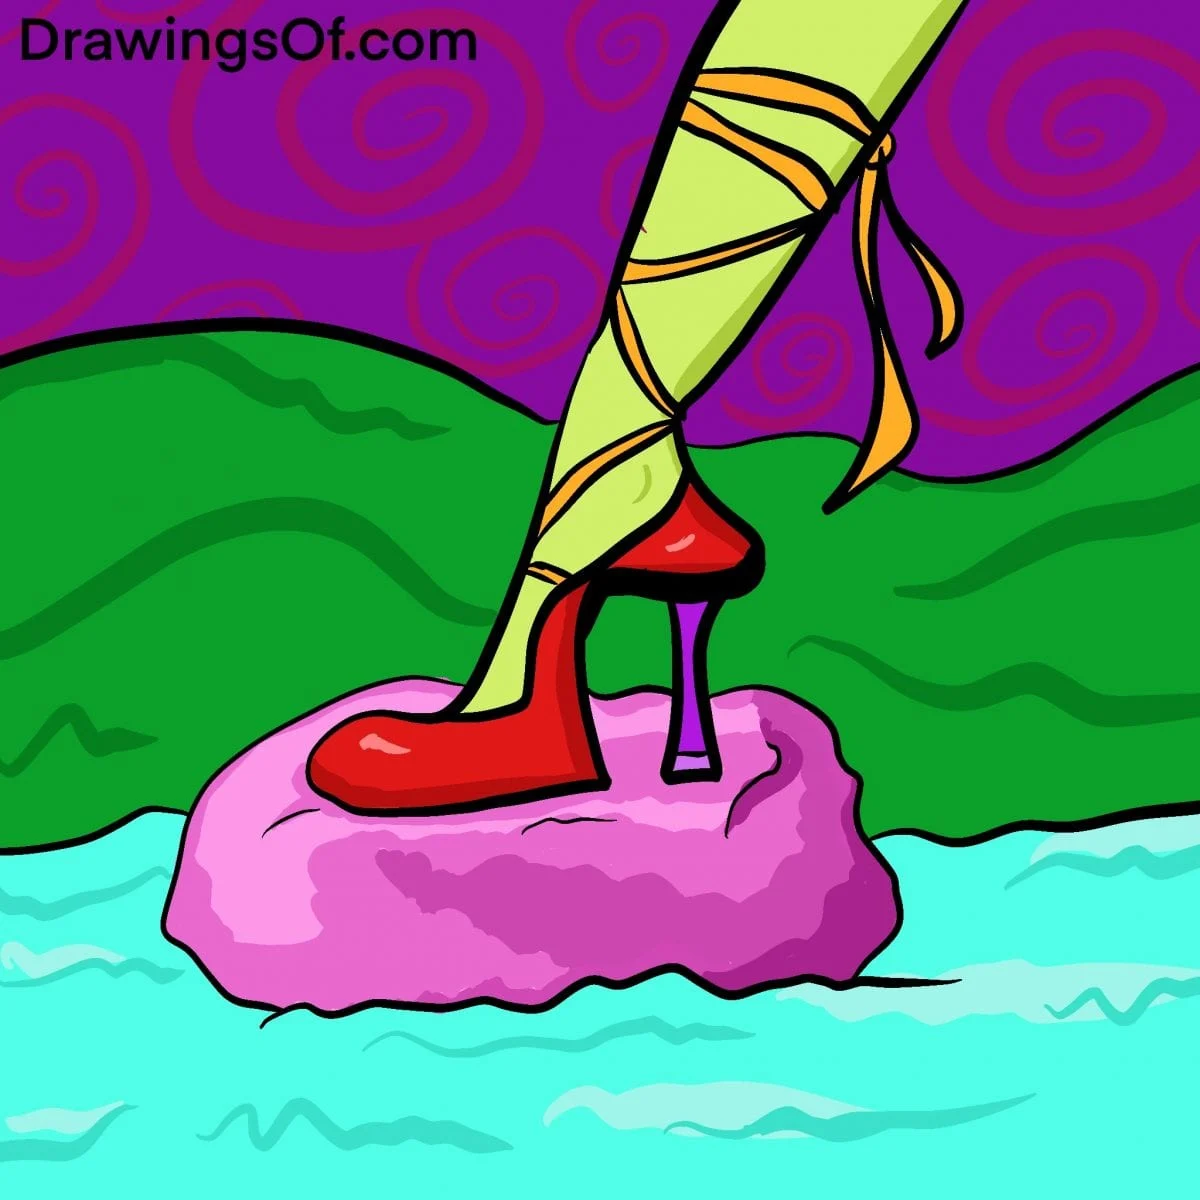 Red high heel on a rock in the river drawing